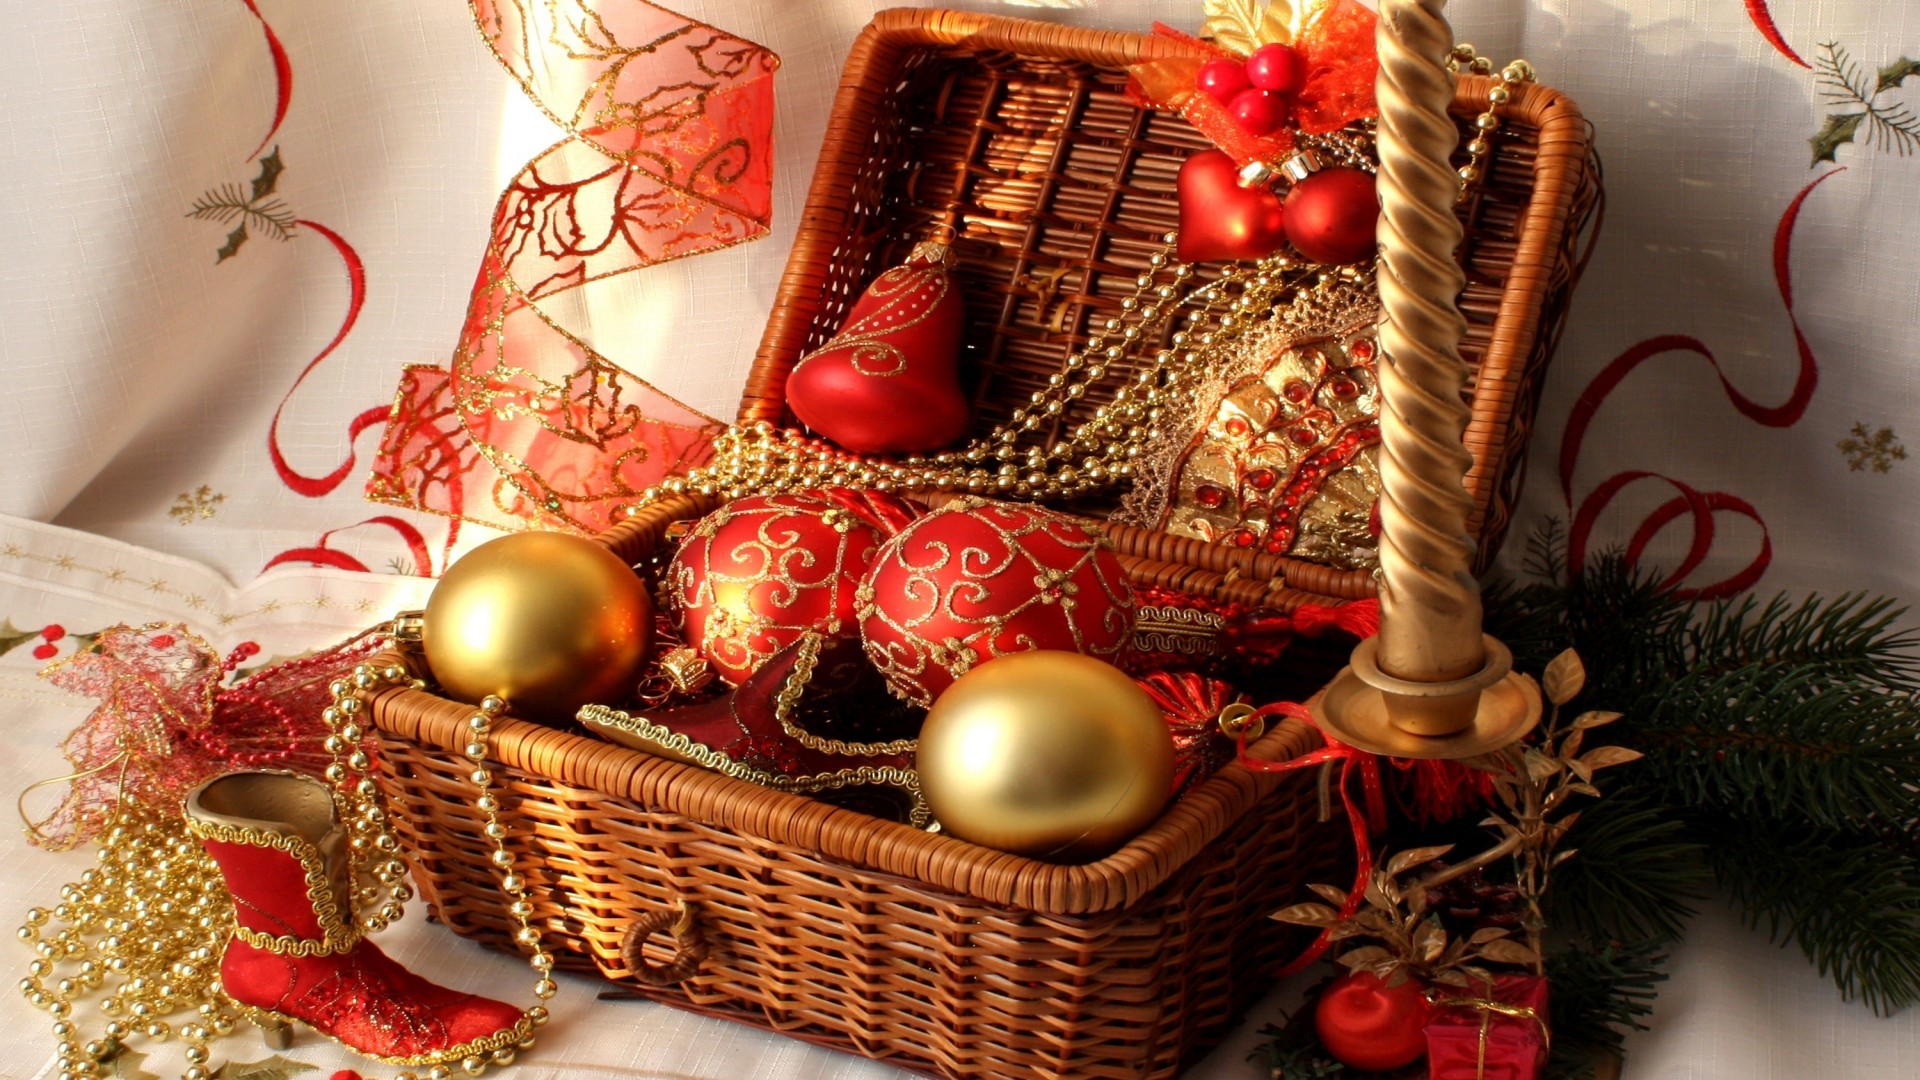 1920x1080 Christmas Decorations Wallpapers HD Wallpapers